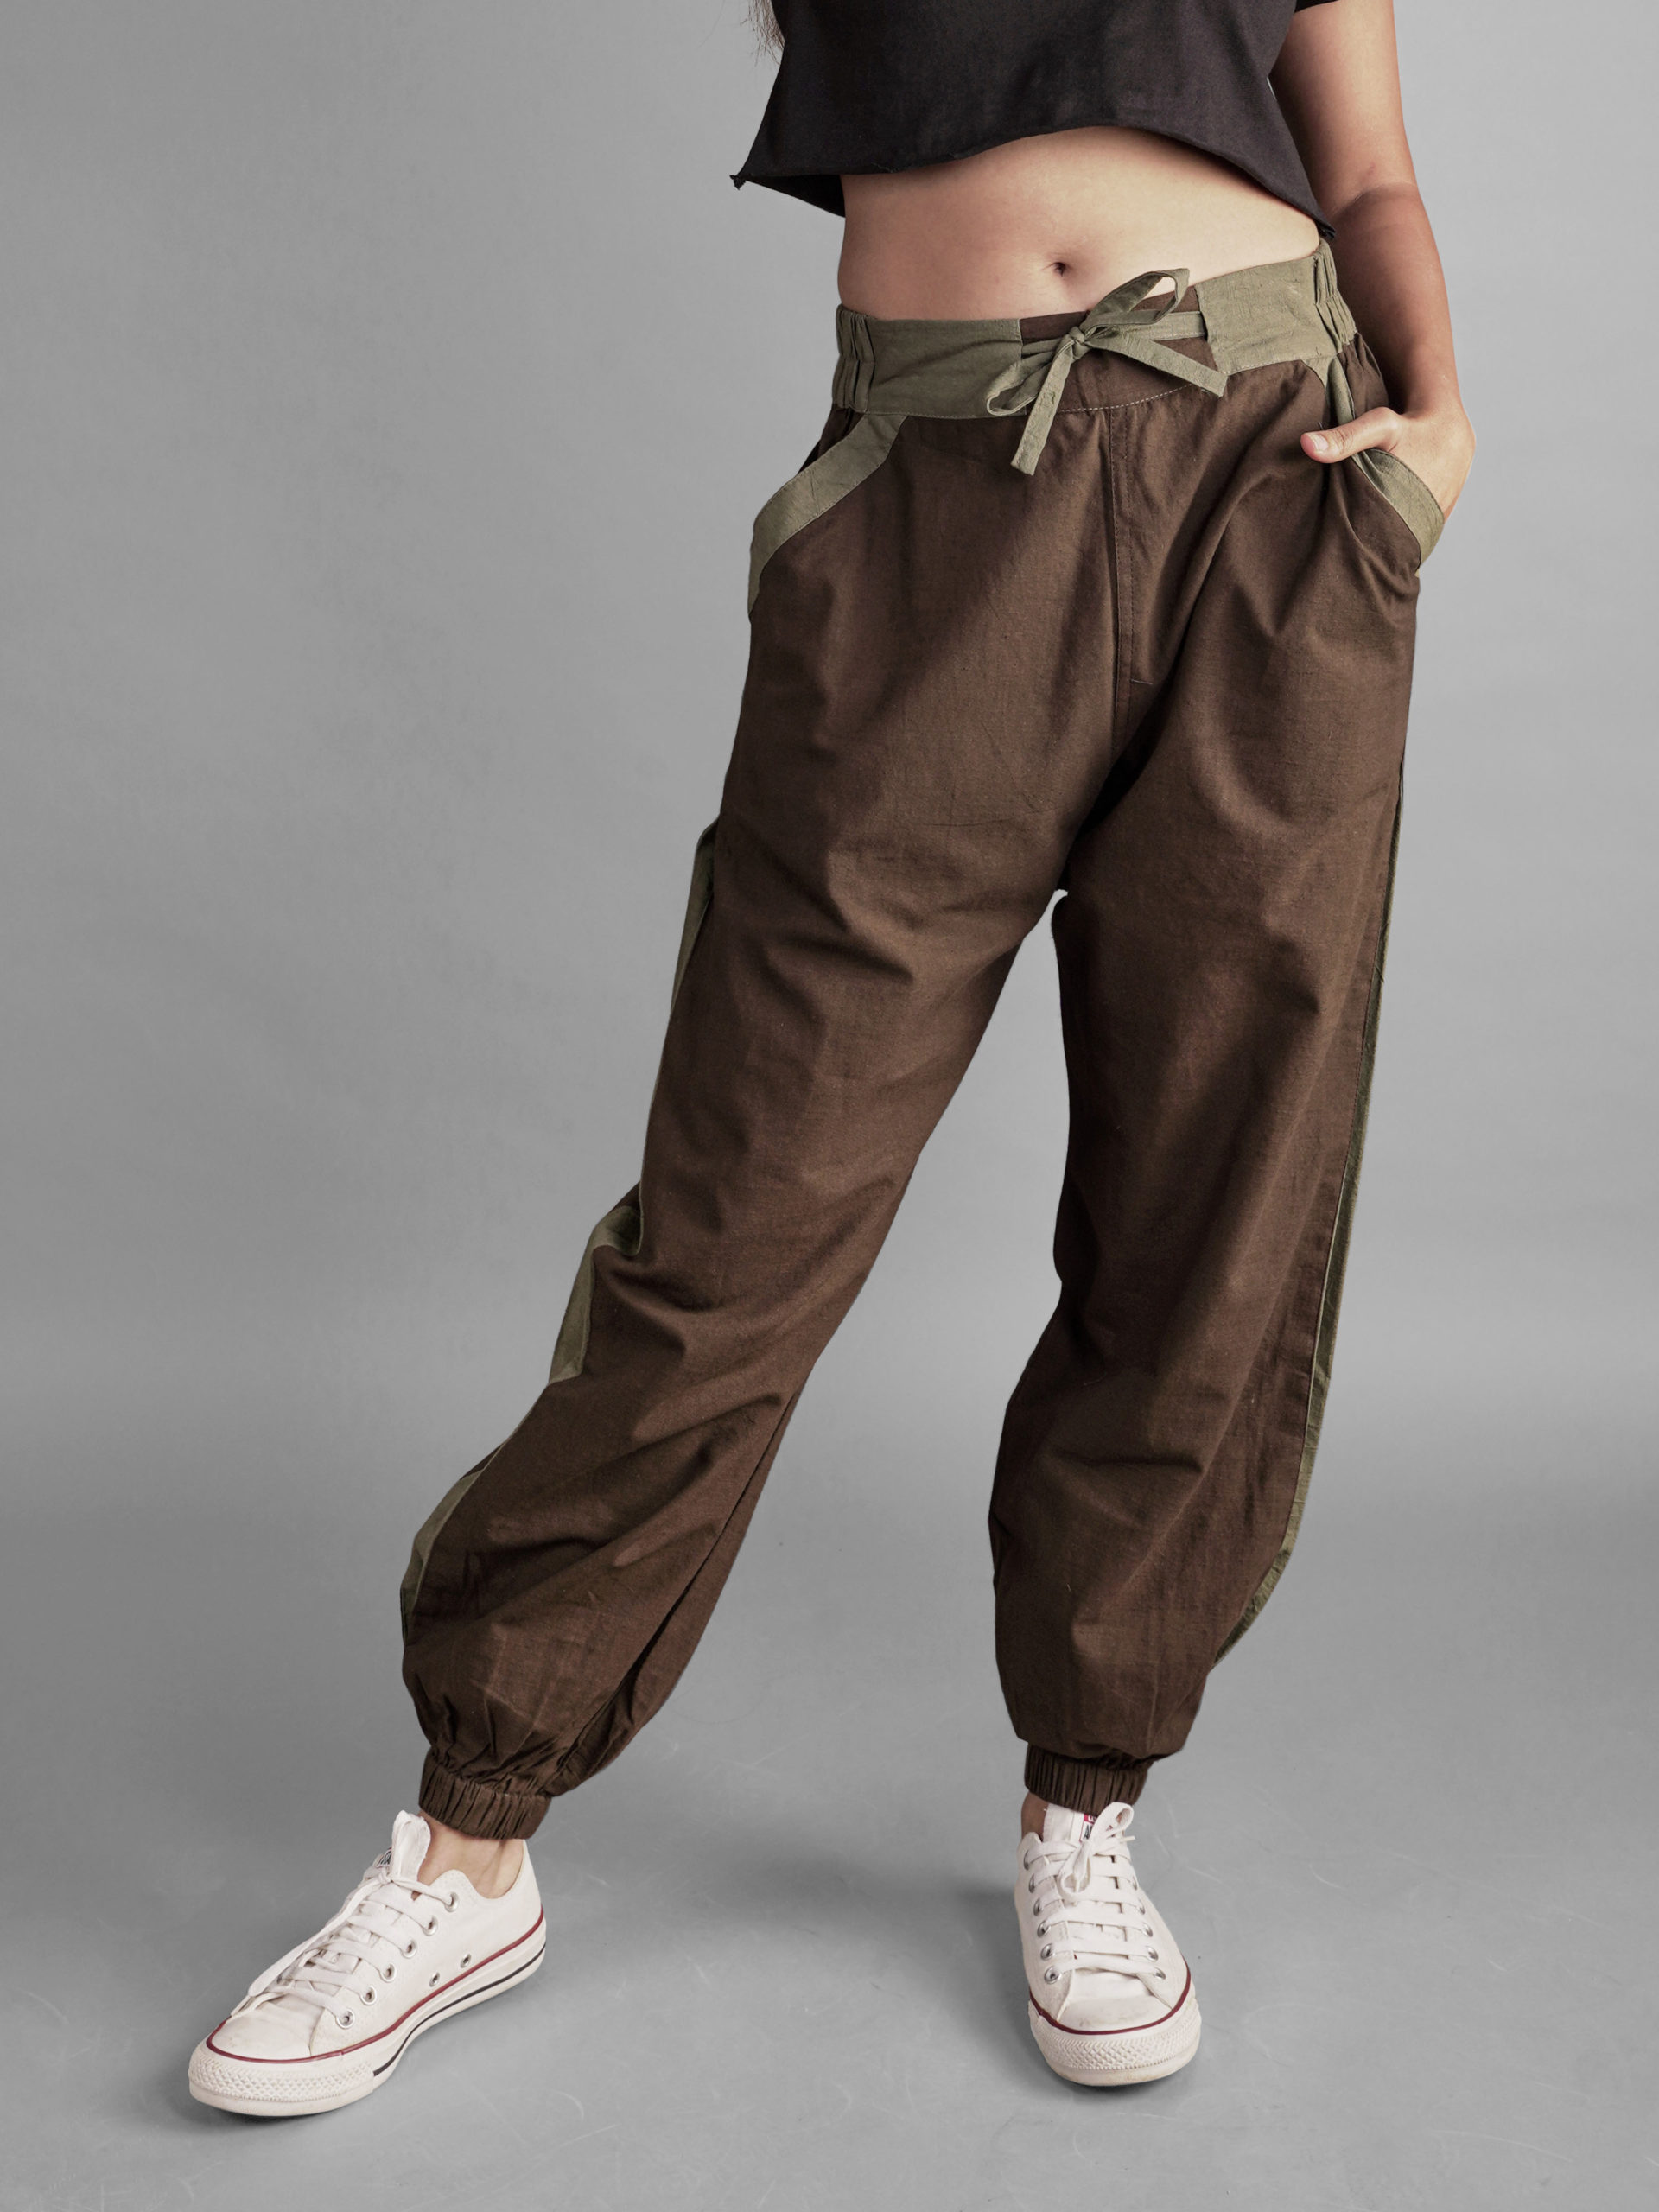 Solid Coffee Brown Textured Hoppers – Unisex Pants For Men And Women ...